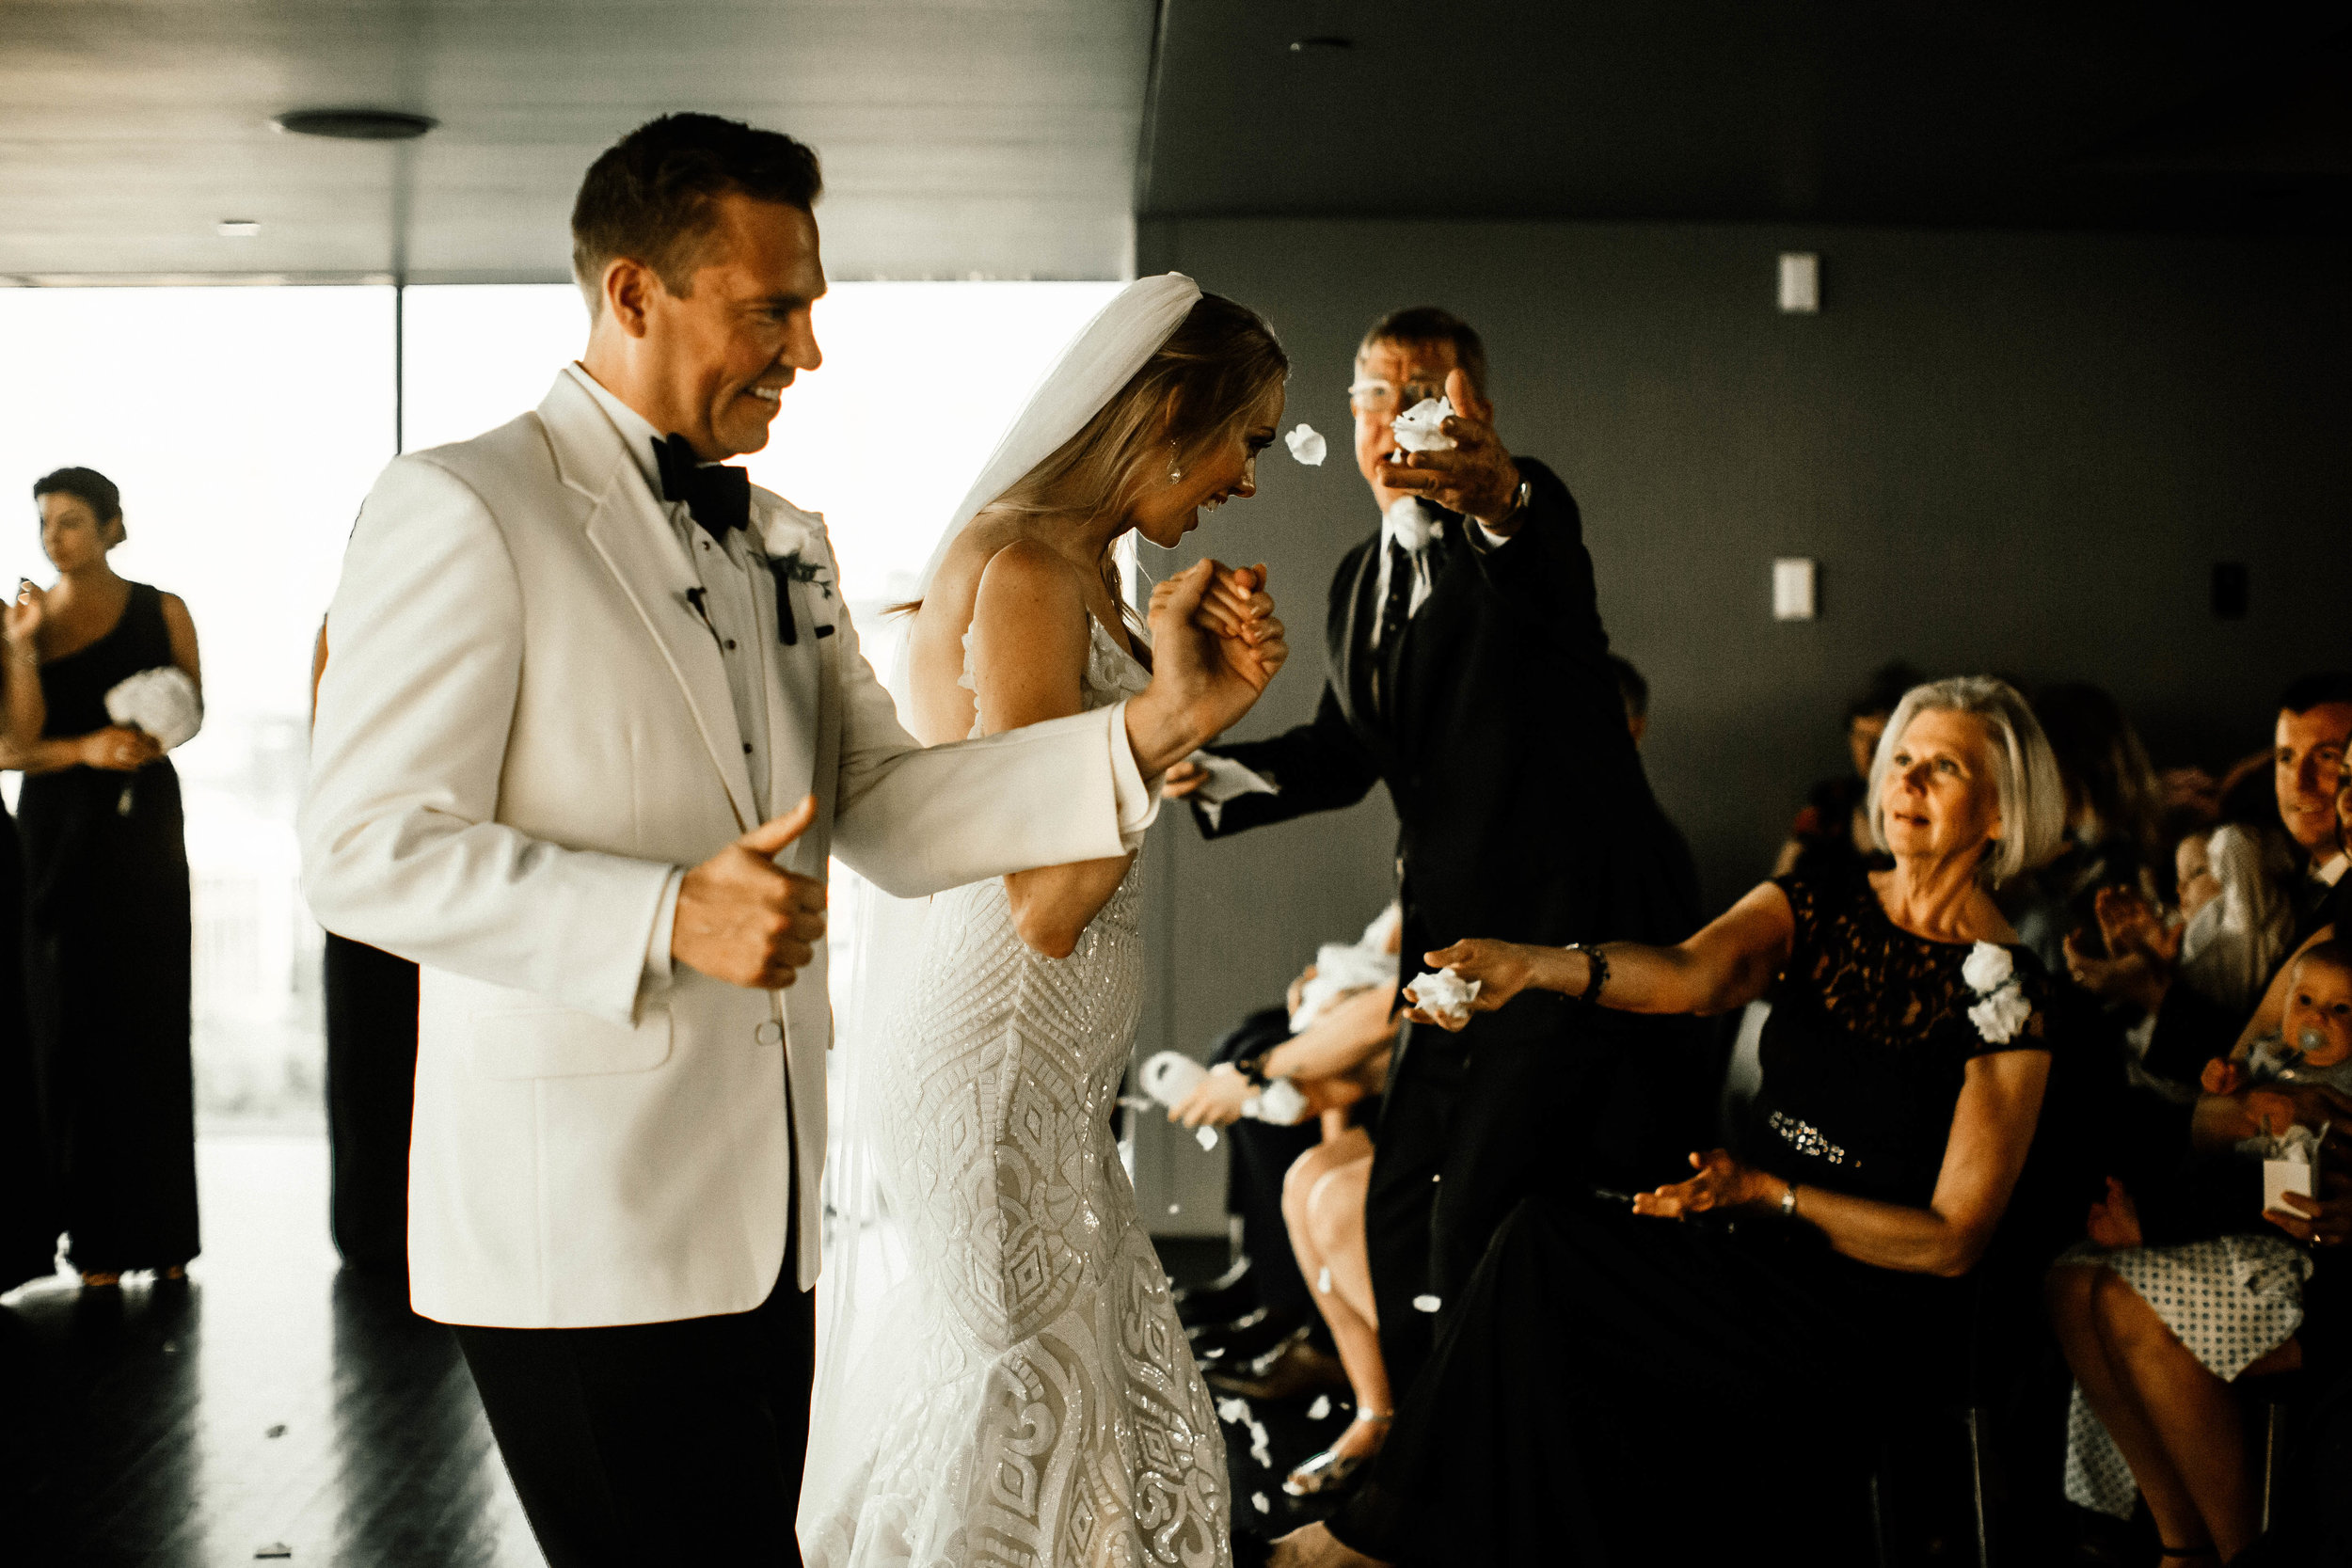 Guthrie amber room wedding ceremony photography